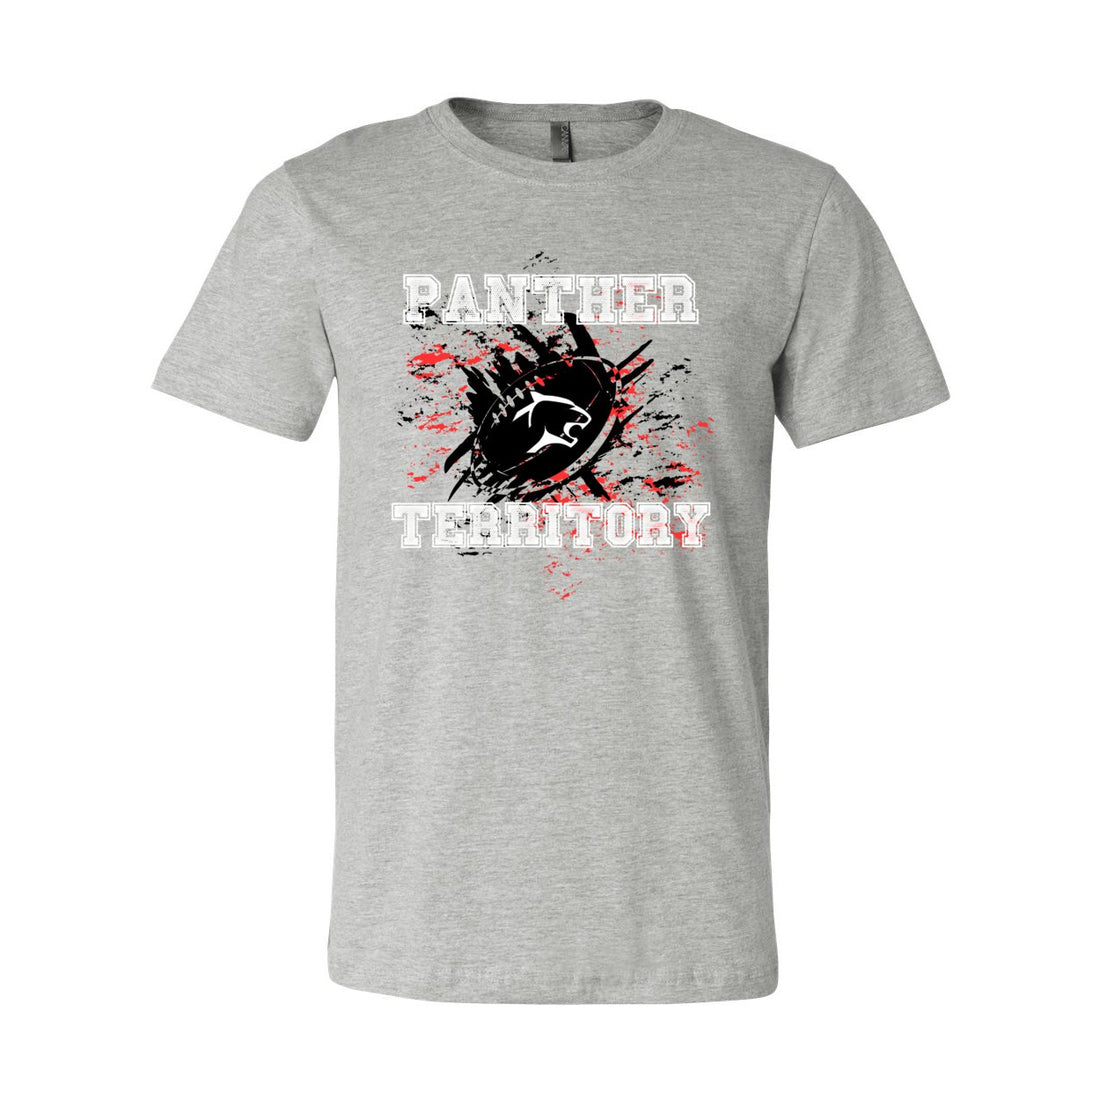 Panther Territory - T-Shirts - Positively Sassy - Panther Territory